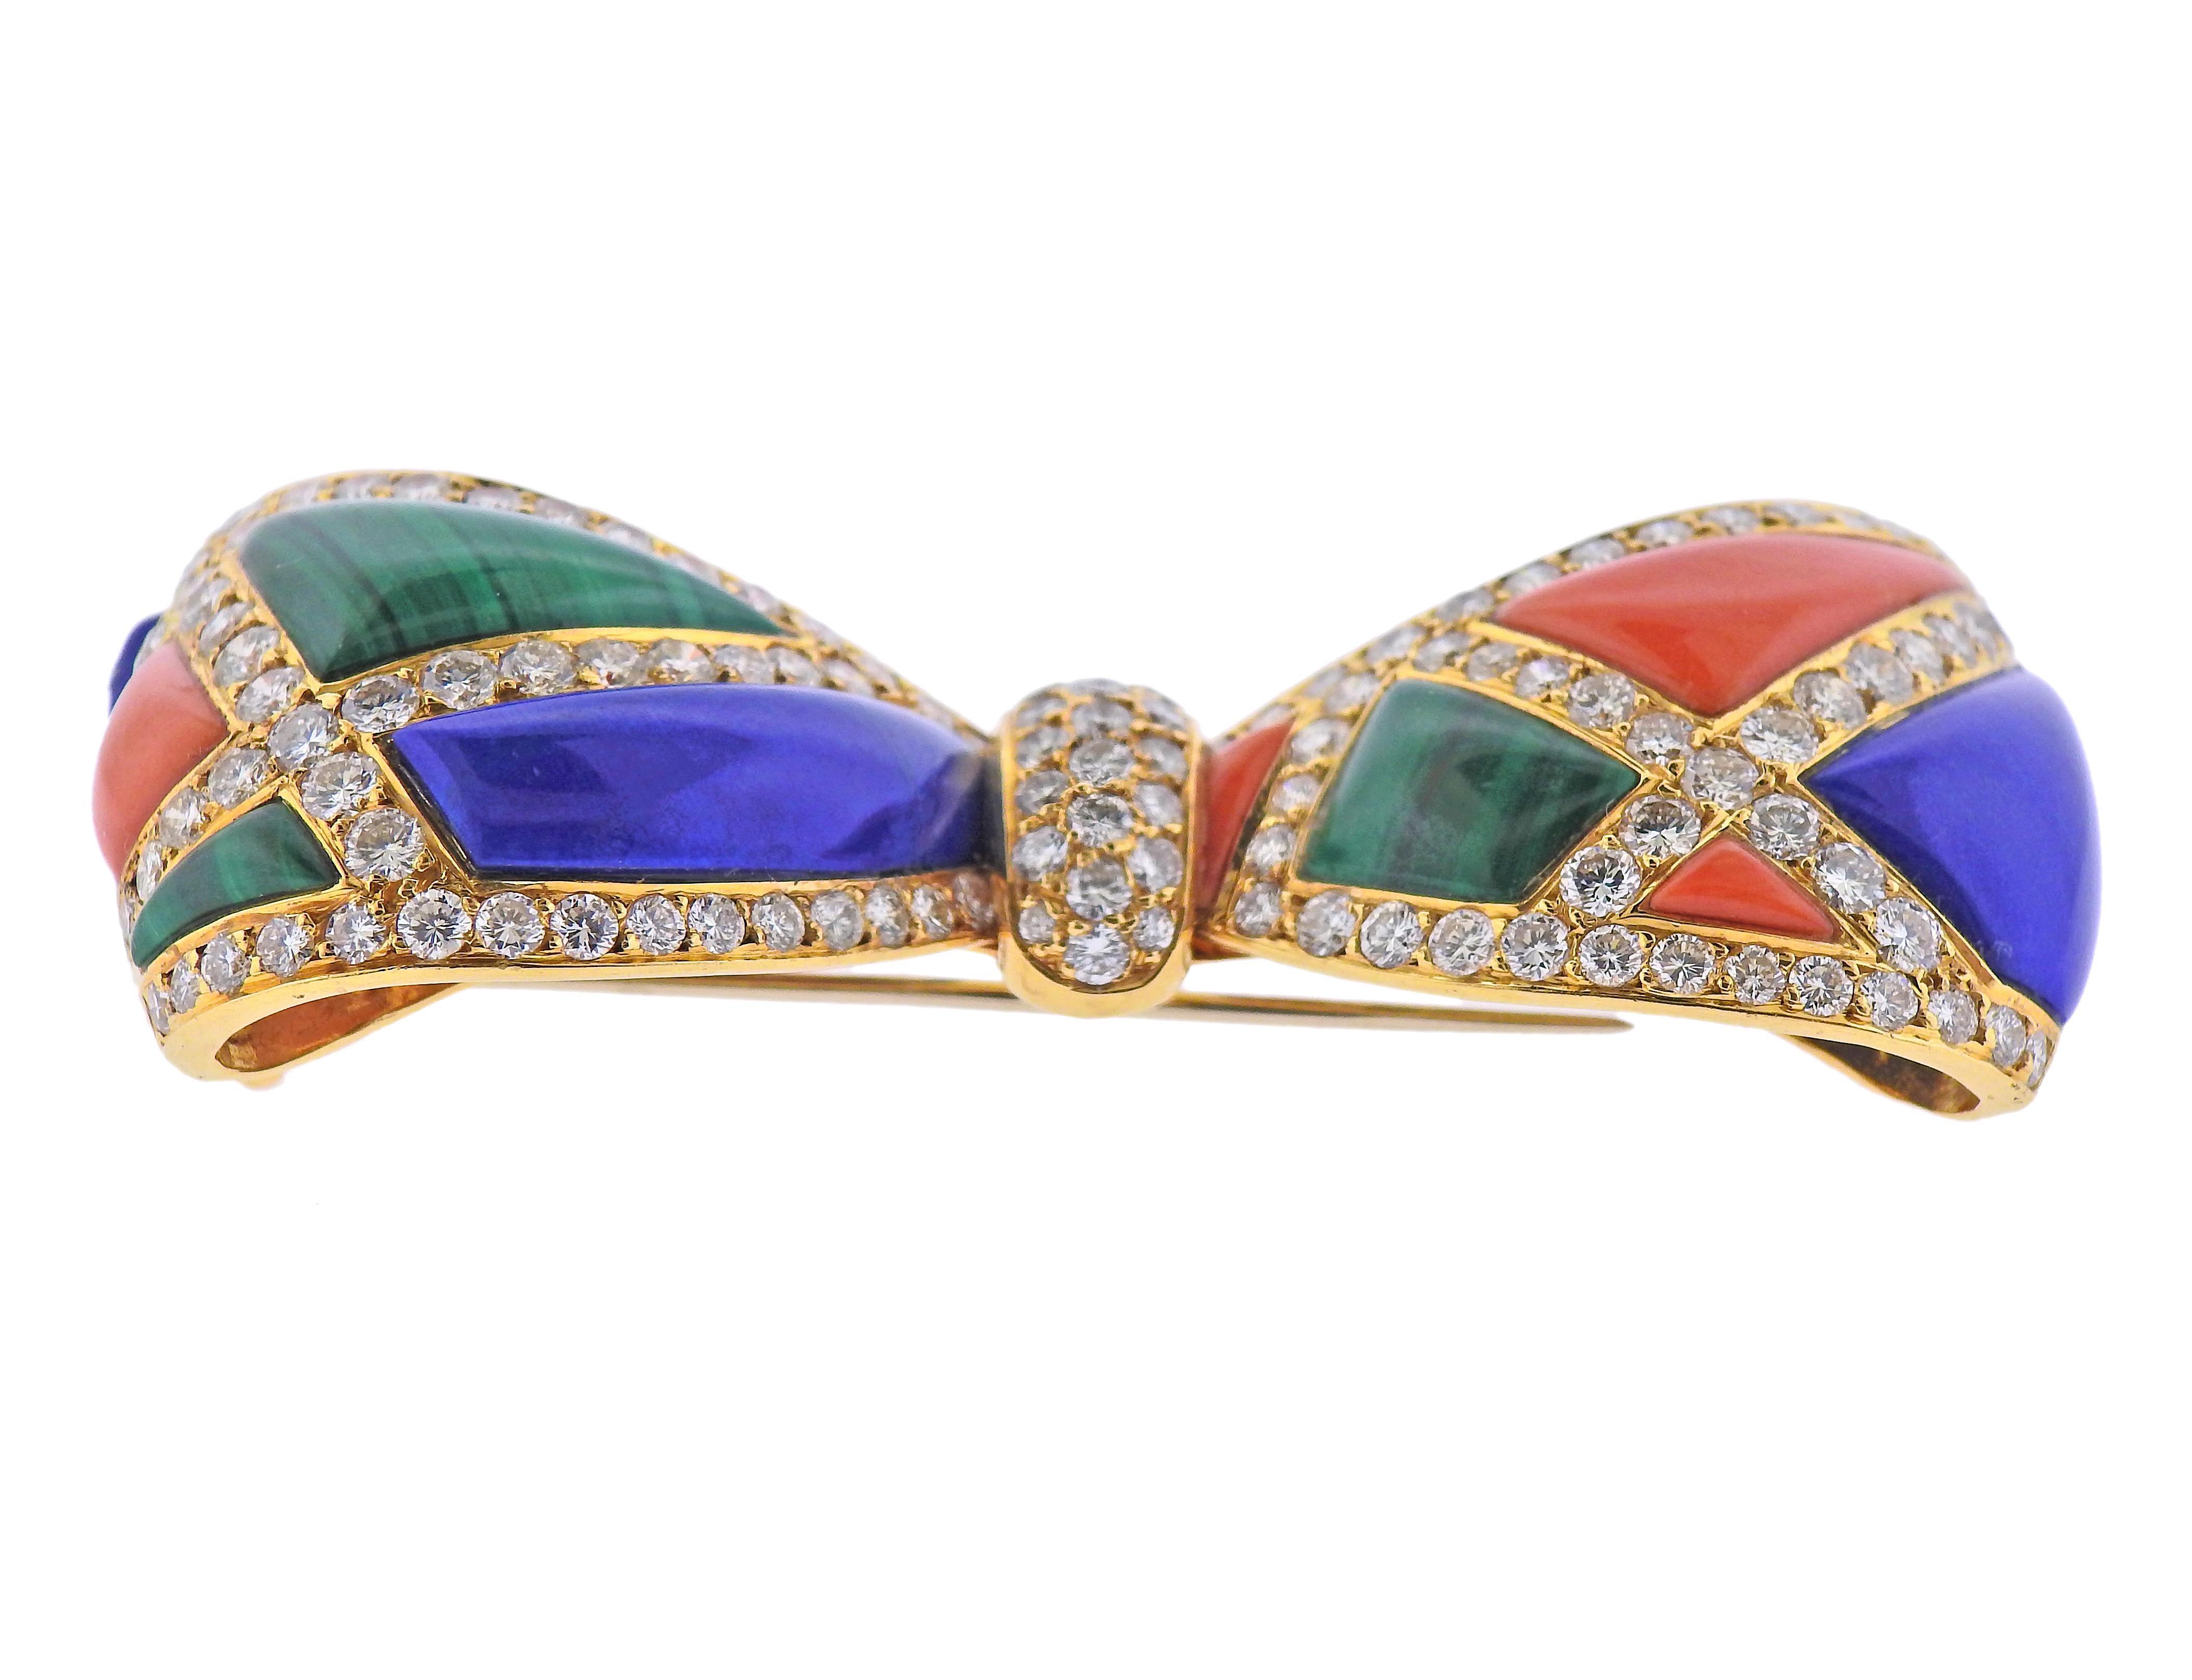 18k gold bow brooch by Van Cleef & Arpels, with lapis, malachite, coral and approx. 4.50-5.00ctw in diamonds. Brooch measures 2.5